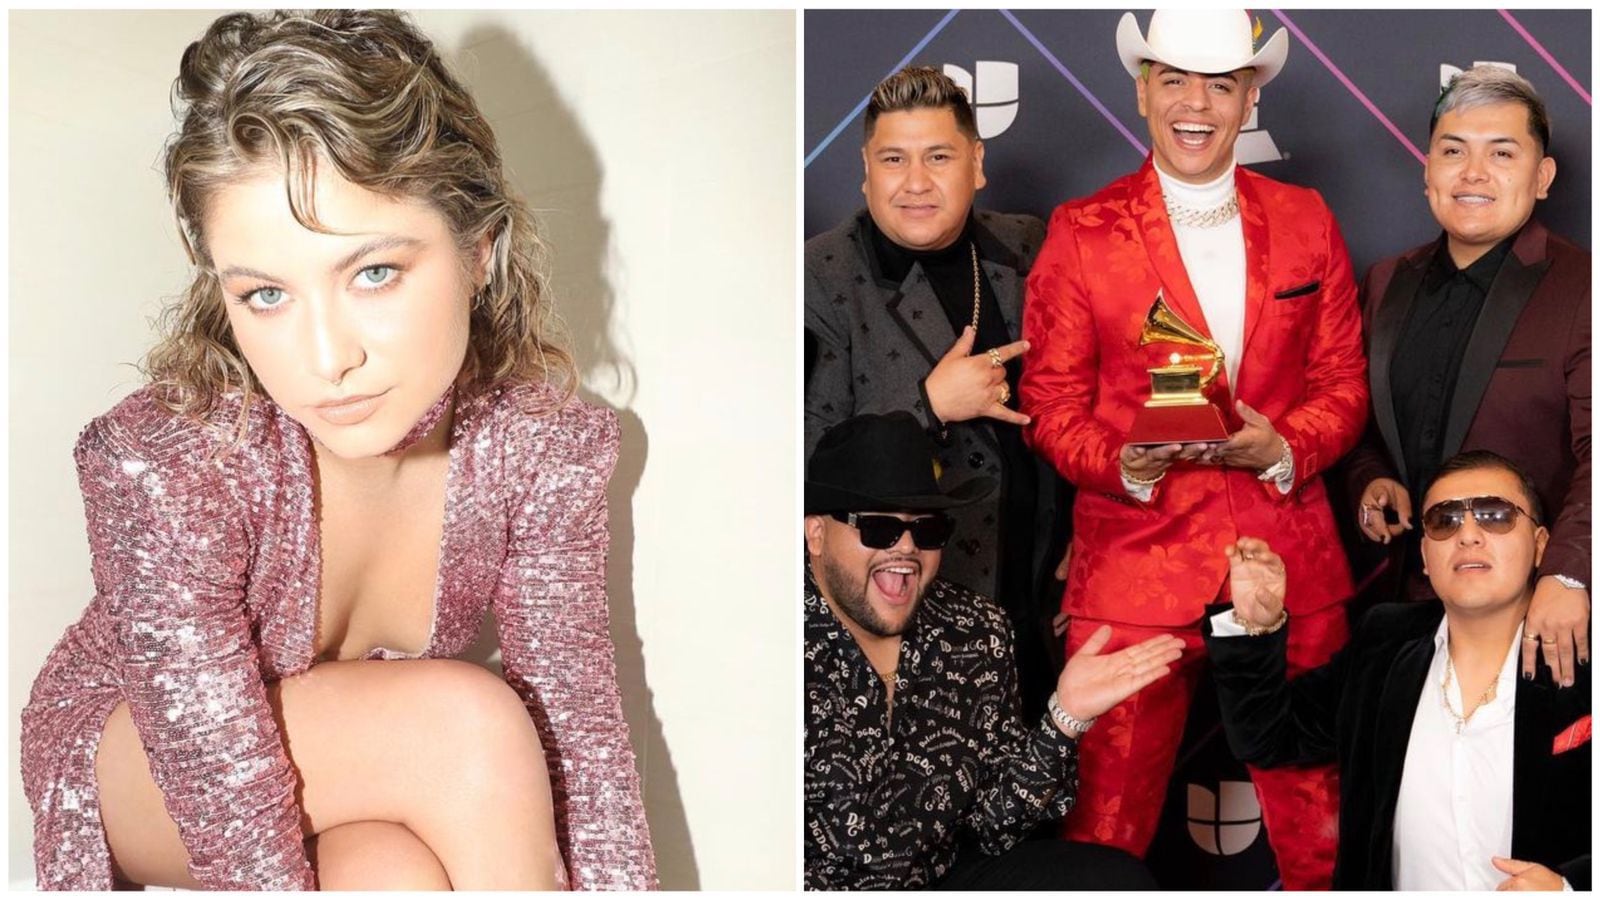 What really happened between Sofía Reyes and Grupo Firme